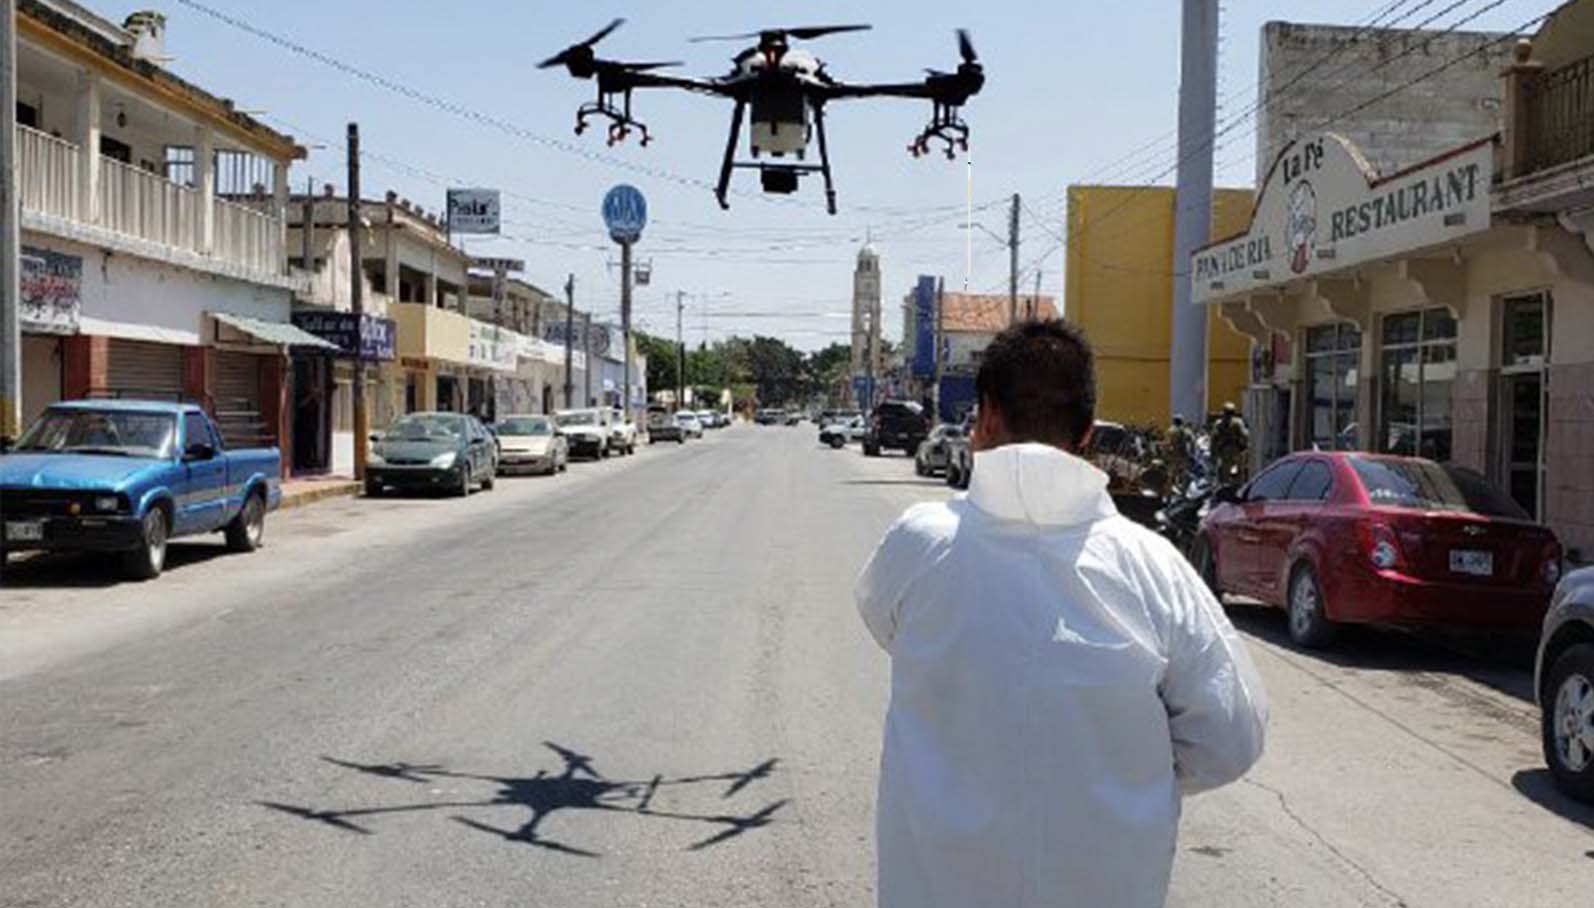 How Drone Technology is Being Used to Flatten the Curve of COVID-19